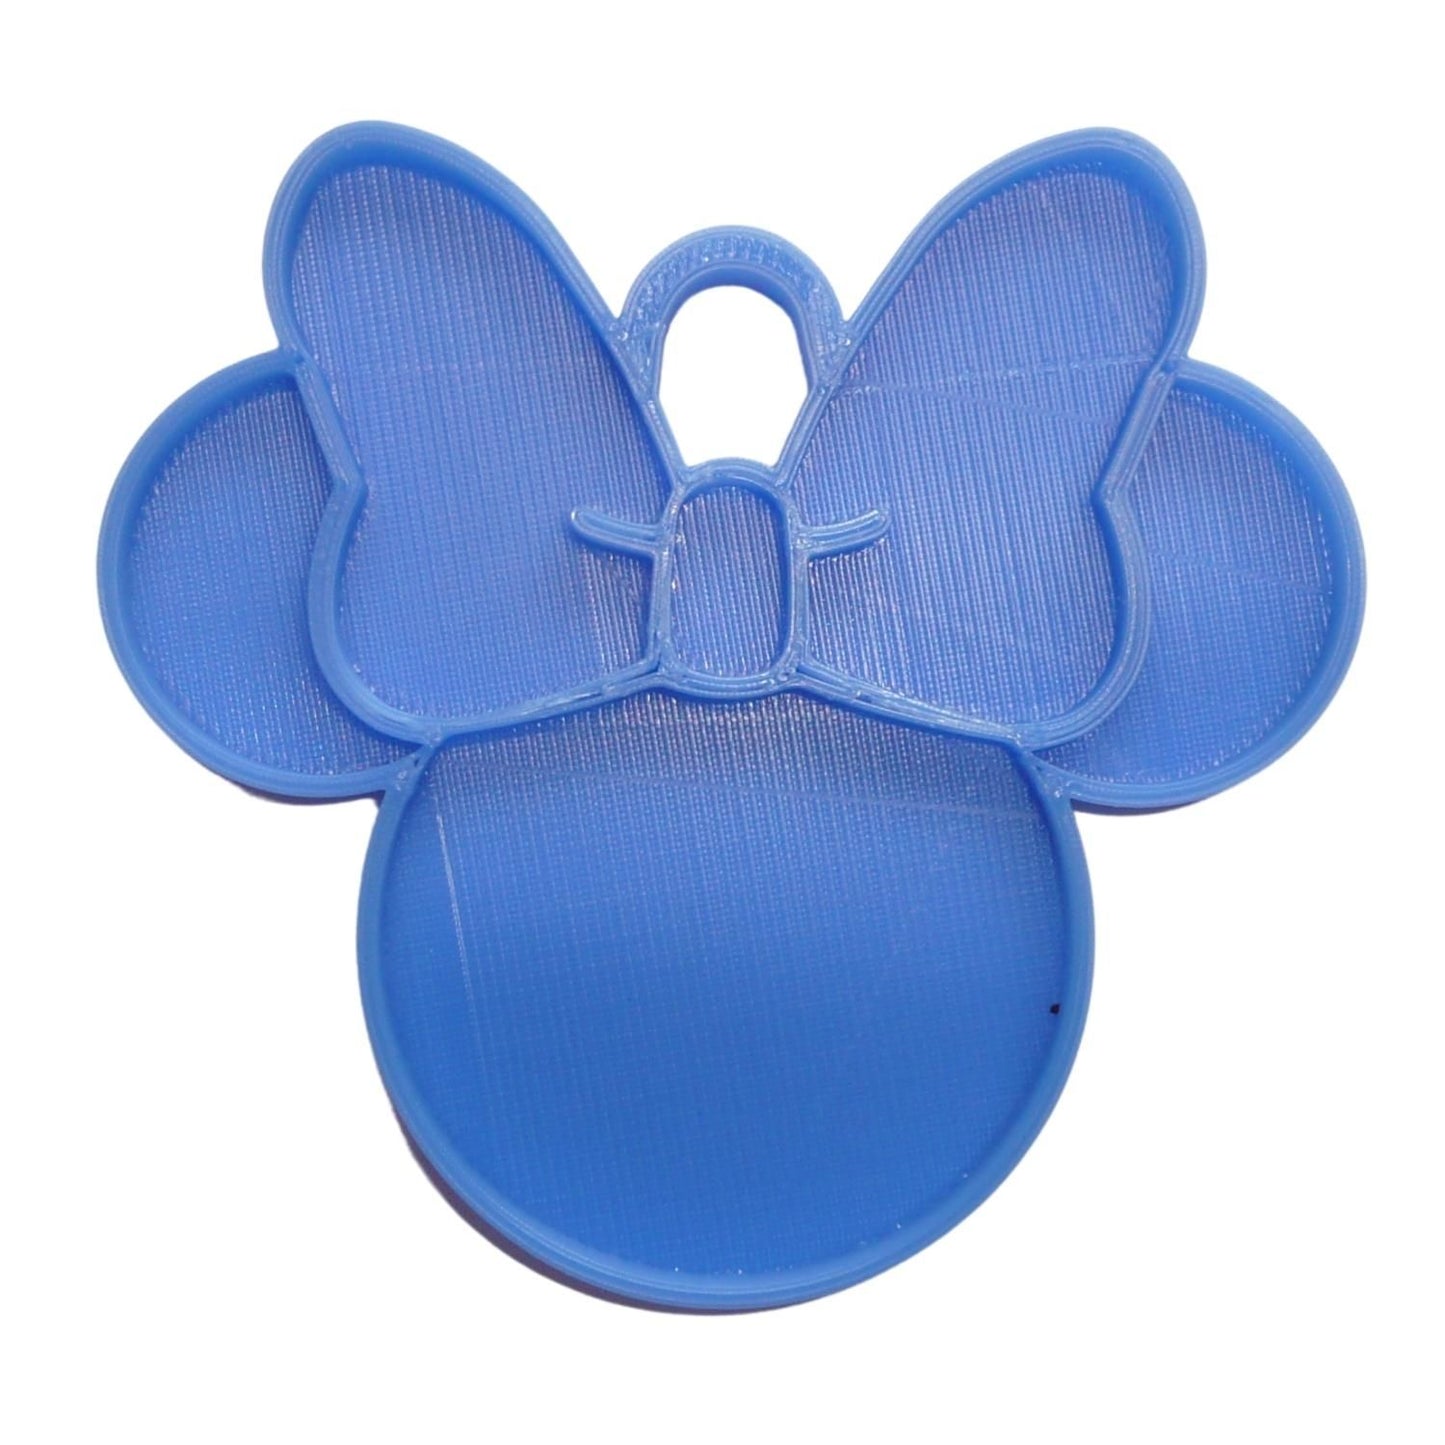 Minnie Mouse Face Ears Shape Blue Christmas Ornament Made in USA PR4875